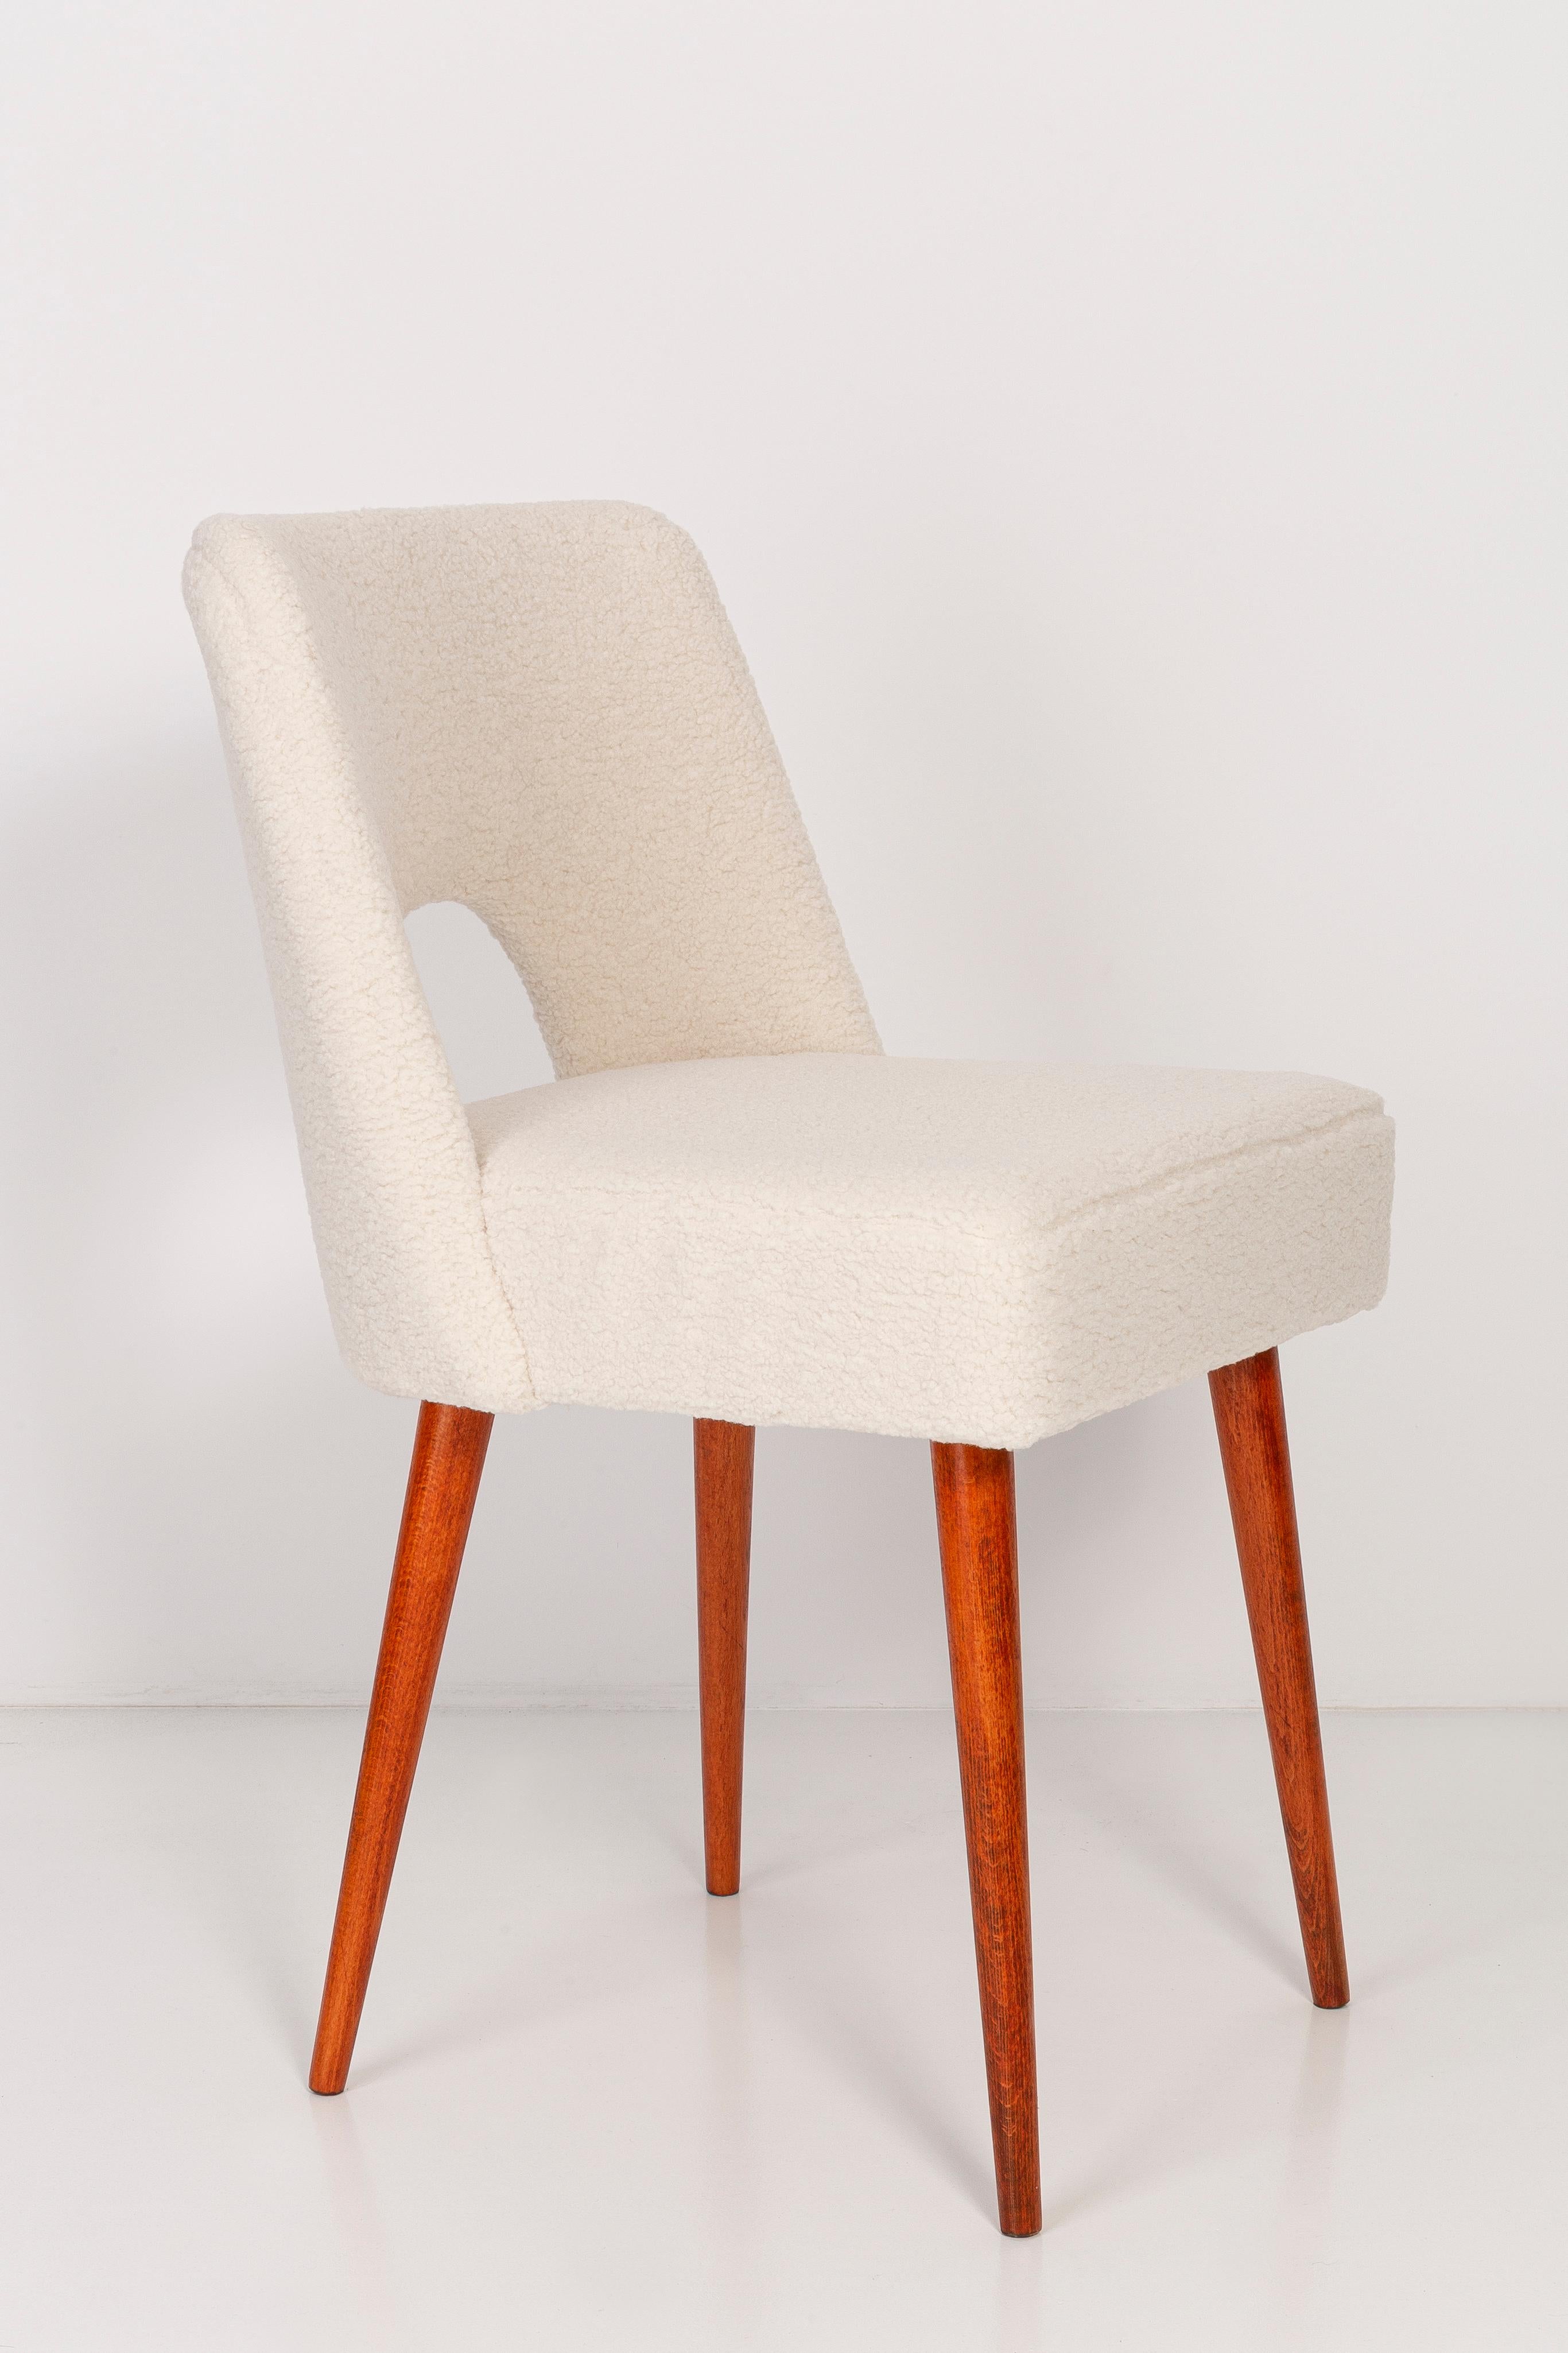 Polish Set of Five Light Crème Boucle 'Shell' Chairs, 1960s For Sale